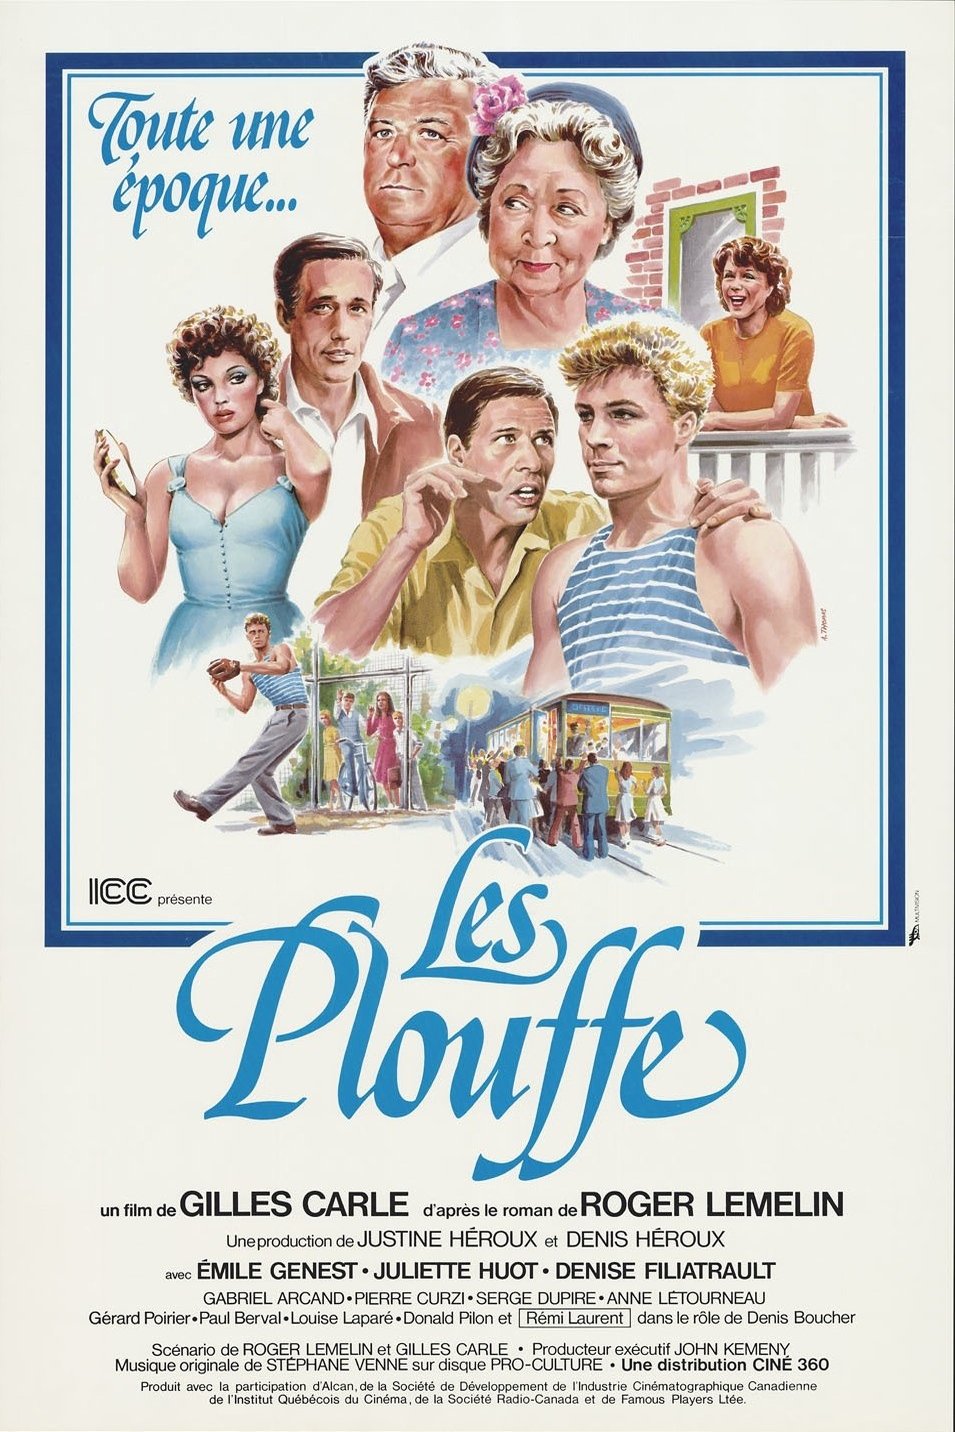 Poster of the movie Les Plouffe